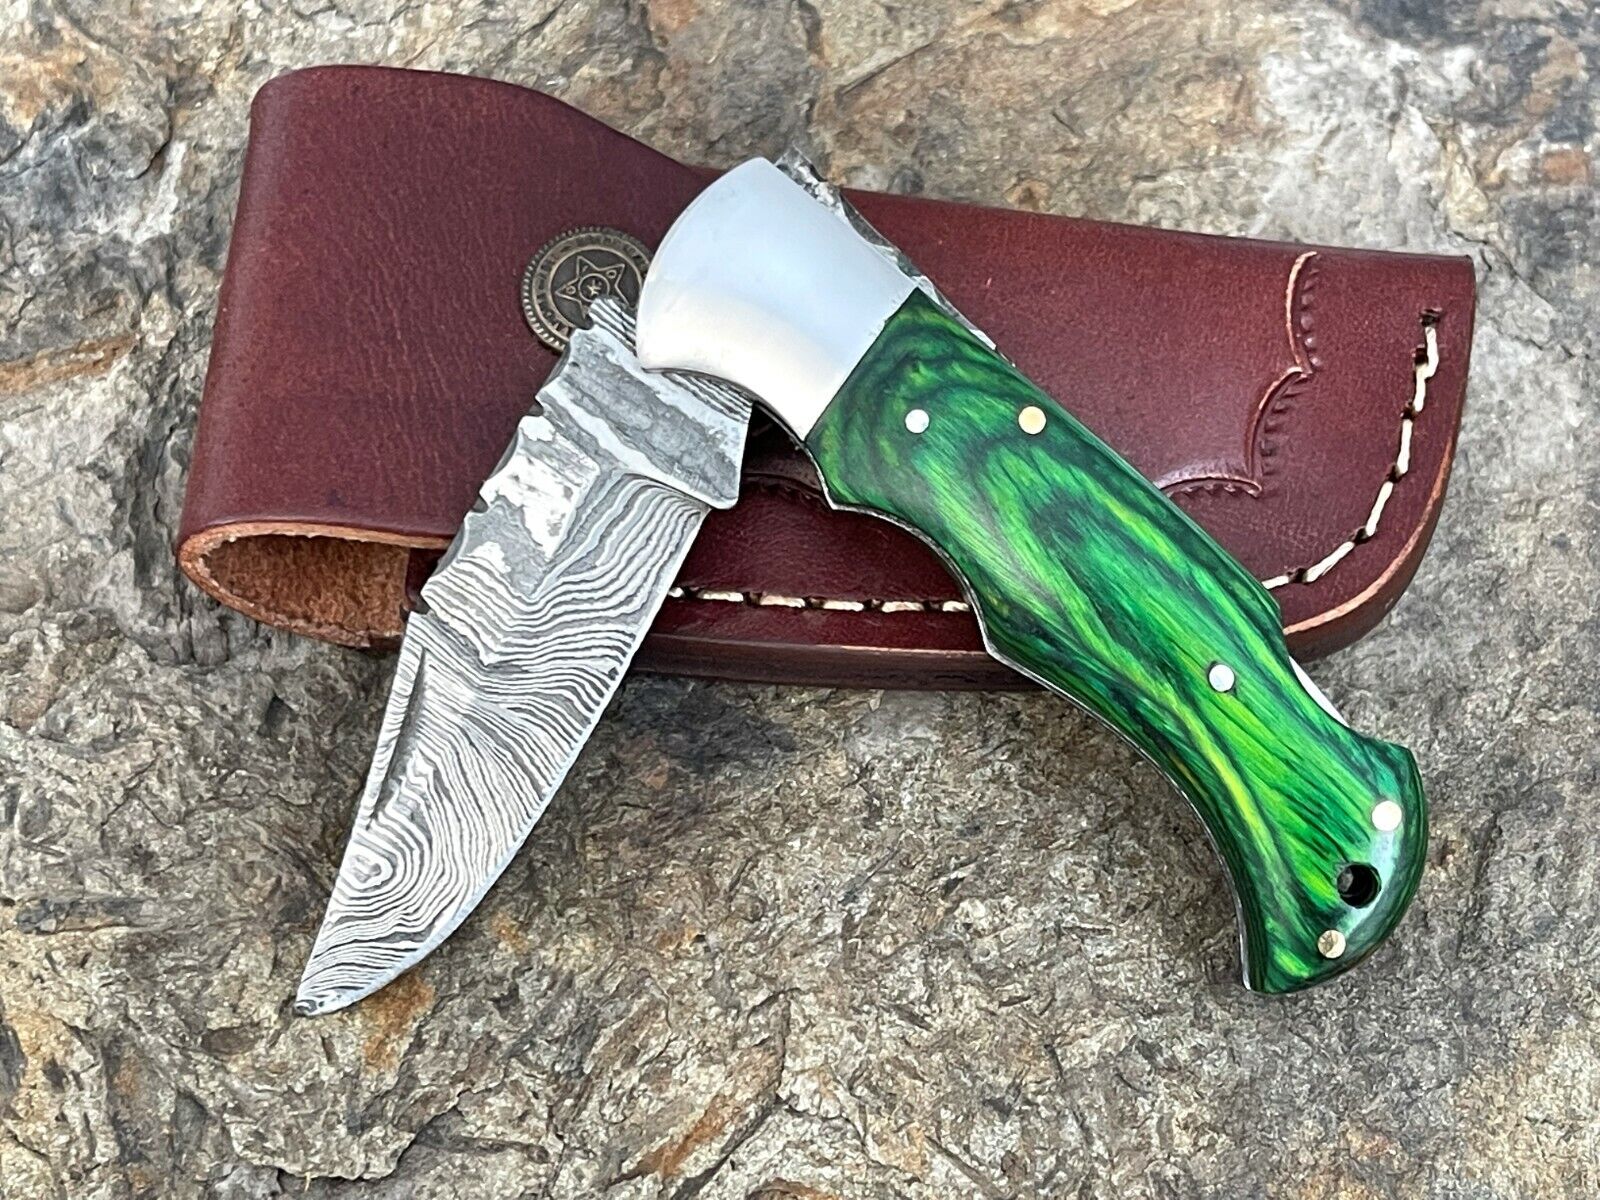 Handmade Damascus Folding Pocket Knife With Small Defects 6.5" (See Description)